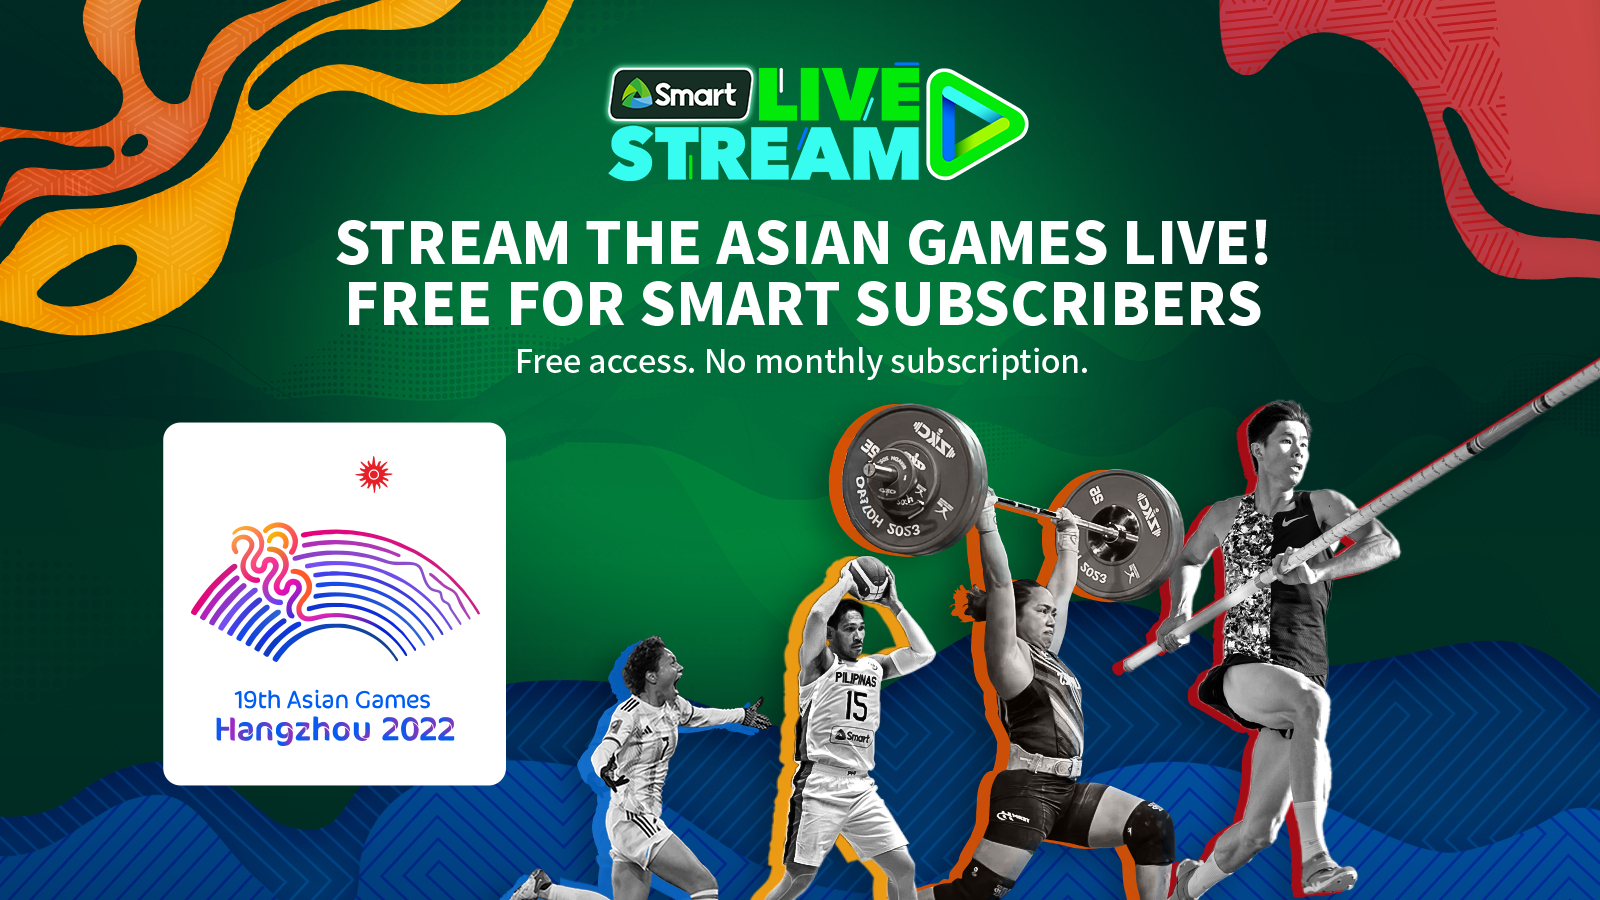 Asian Games streamed live on Asian Games